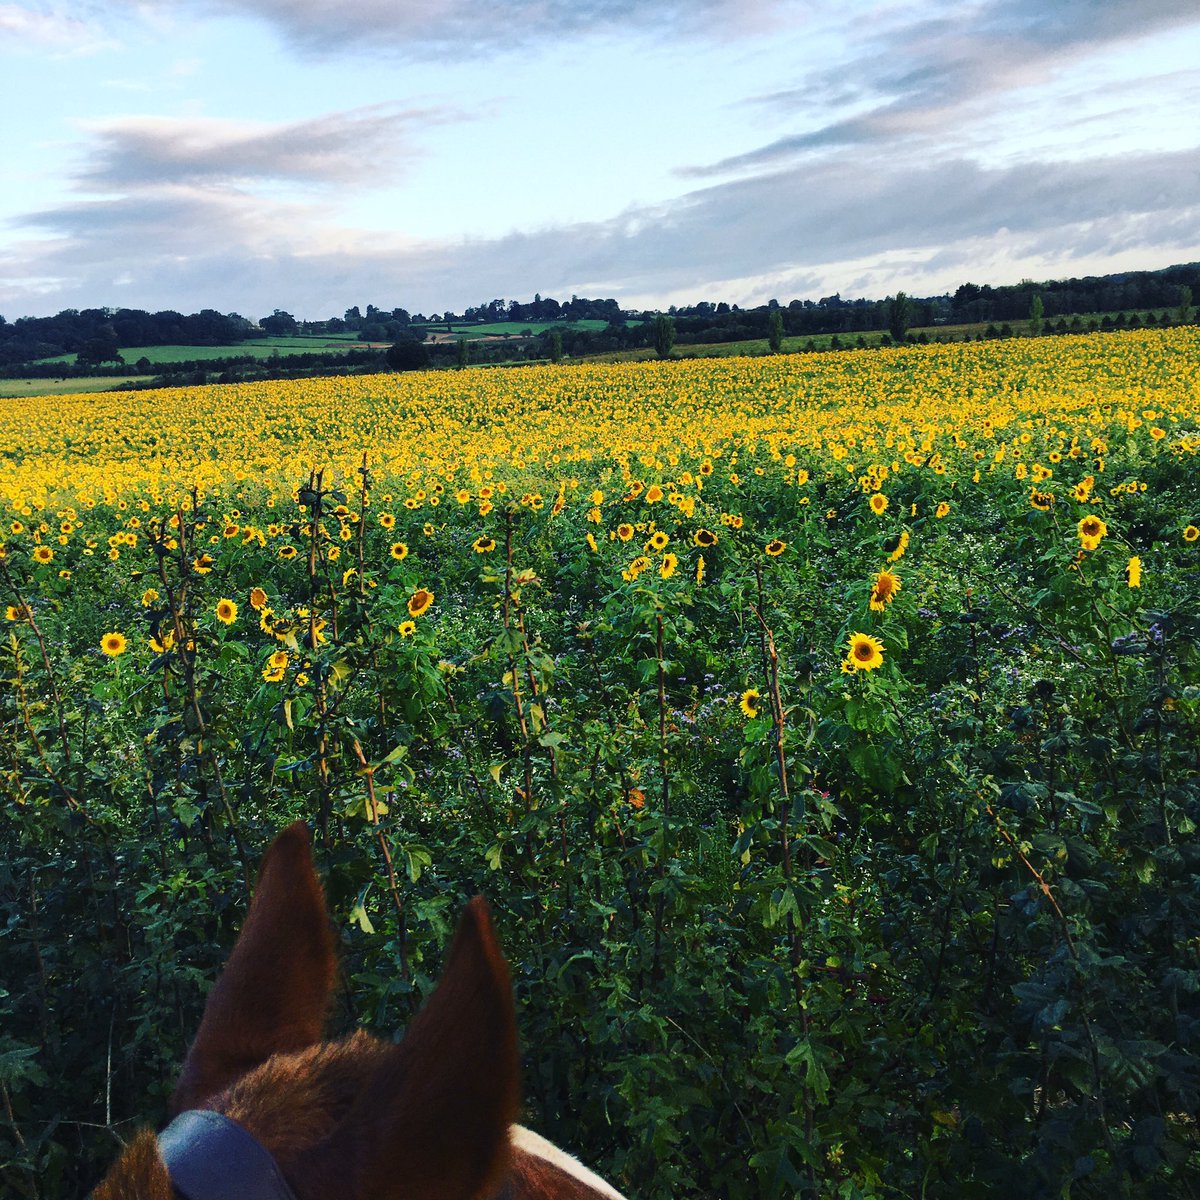 Lovely start to the day today 🌻 #cookham #Maidenhead #horseriding